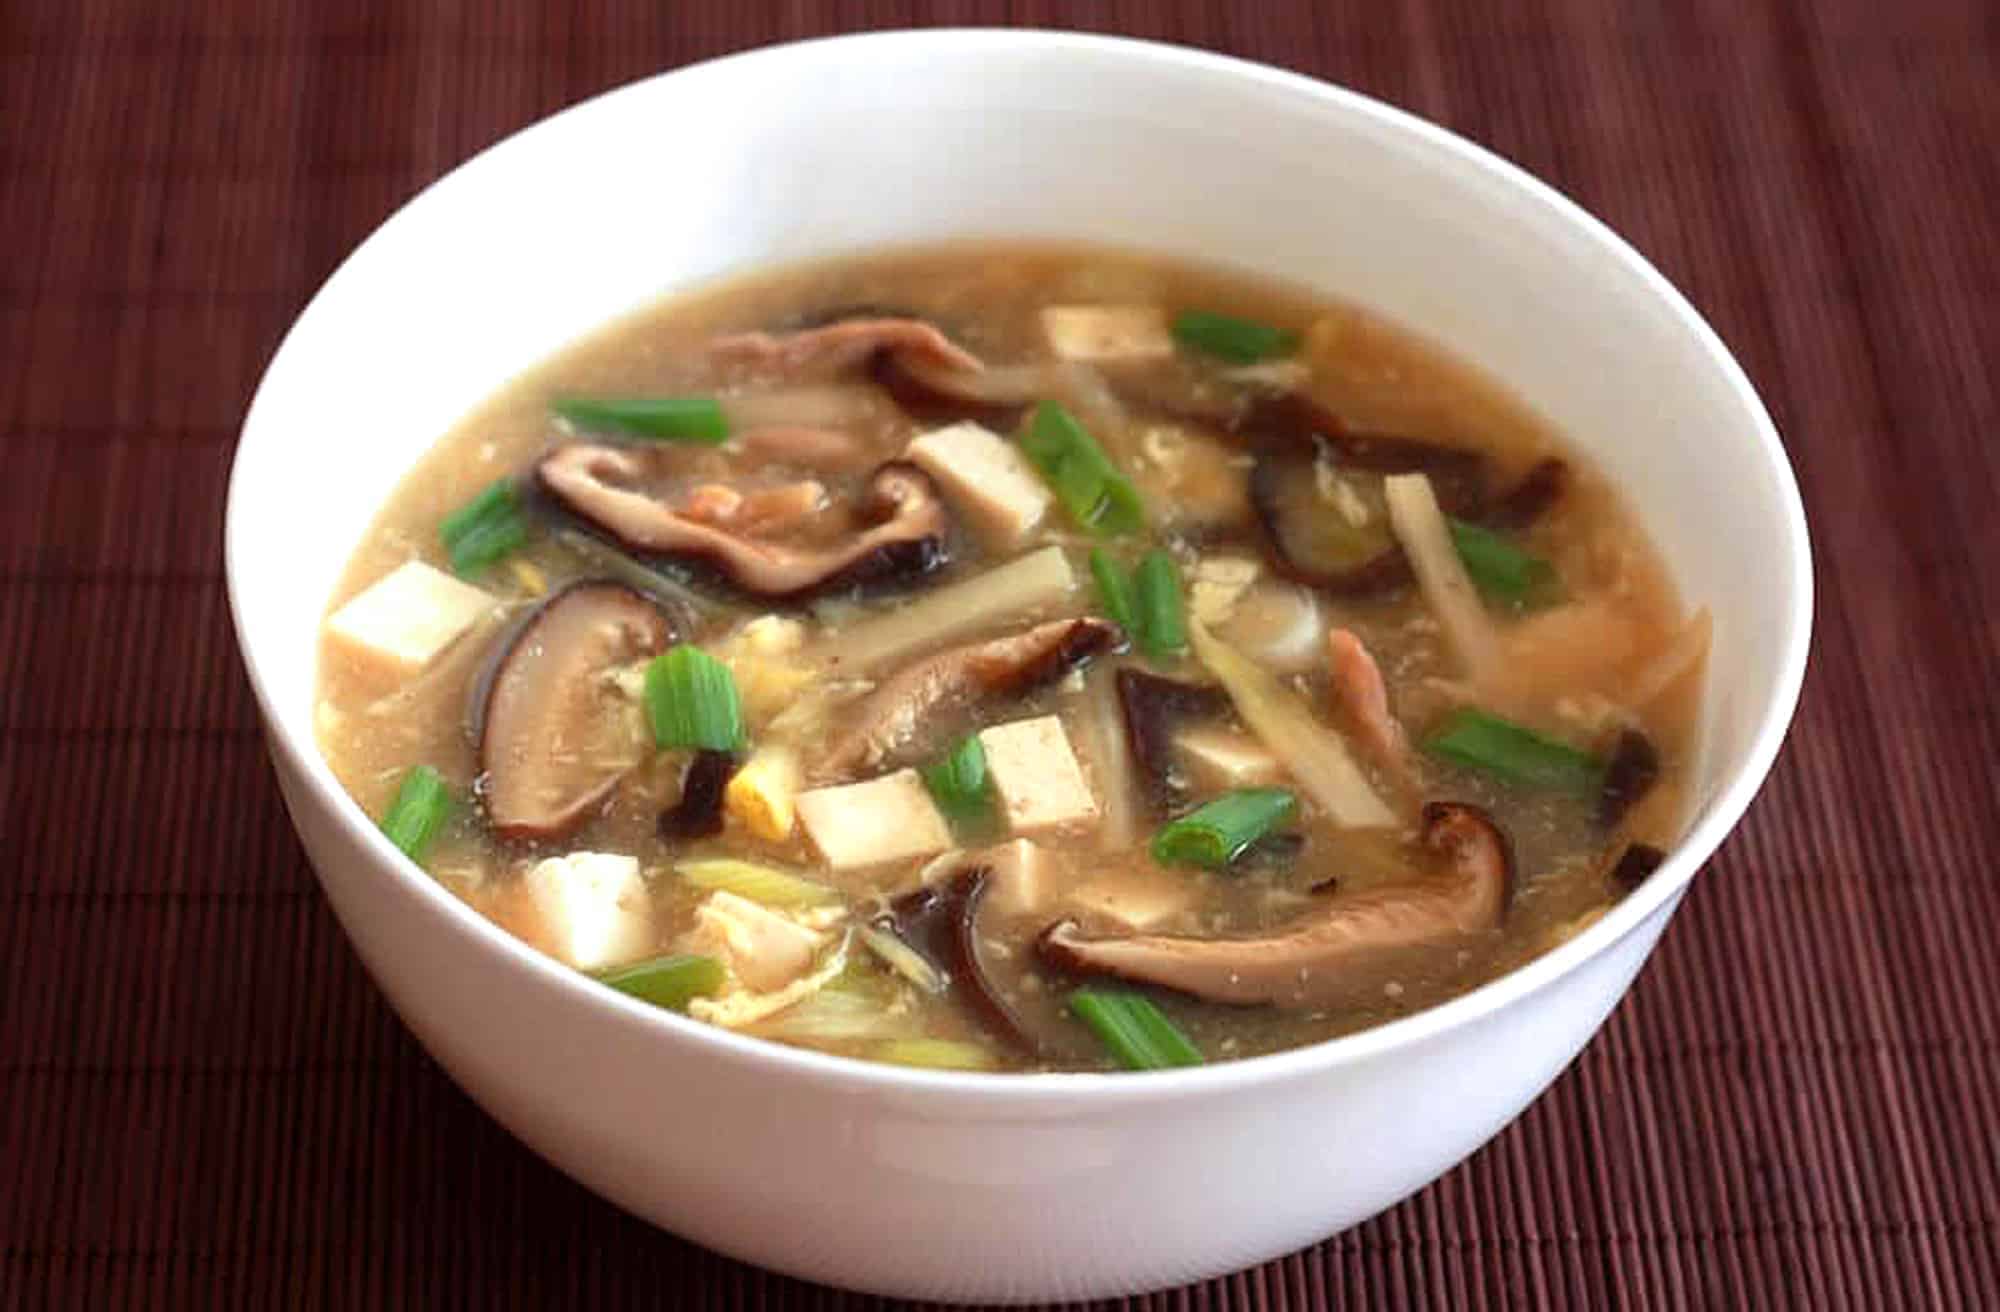 hot and sour soup recipe best authentic traditional Chinese restaurant style homemade